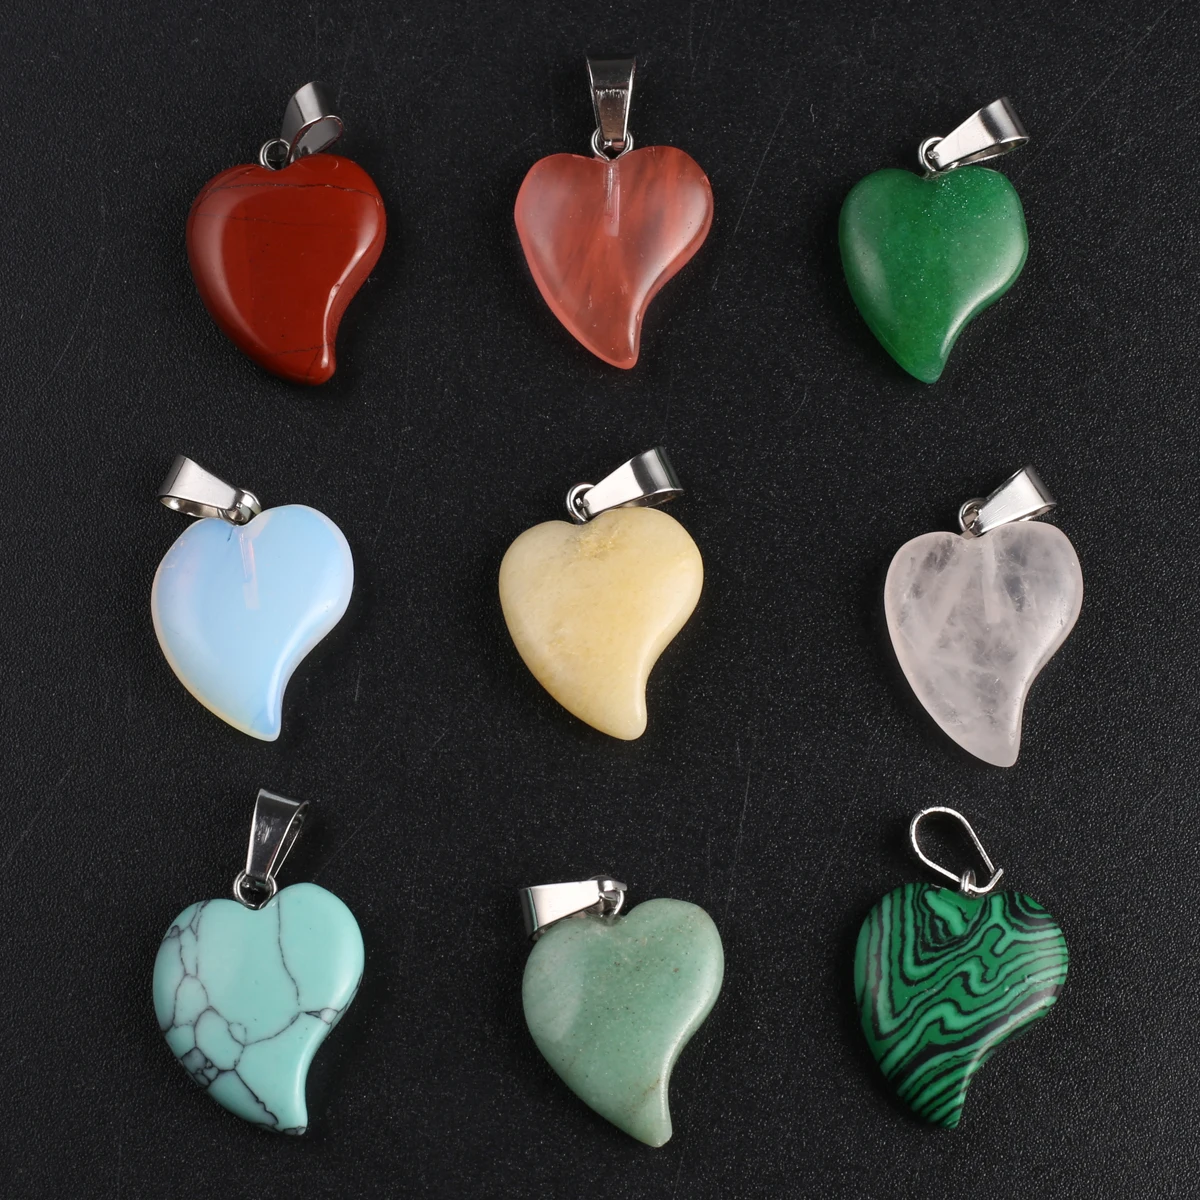 

20PCS Wholesale Heart-shaped Natural Stone Malachite Crystal Reiki Healing Pendant Jewelry Making DIY Necklace Accessories